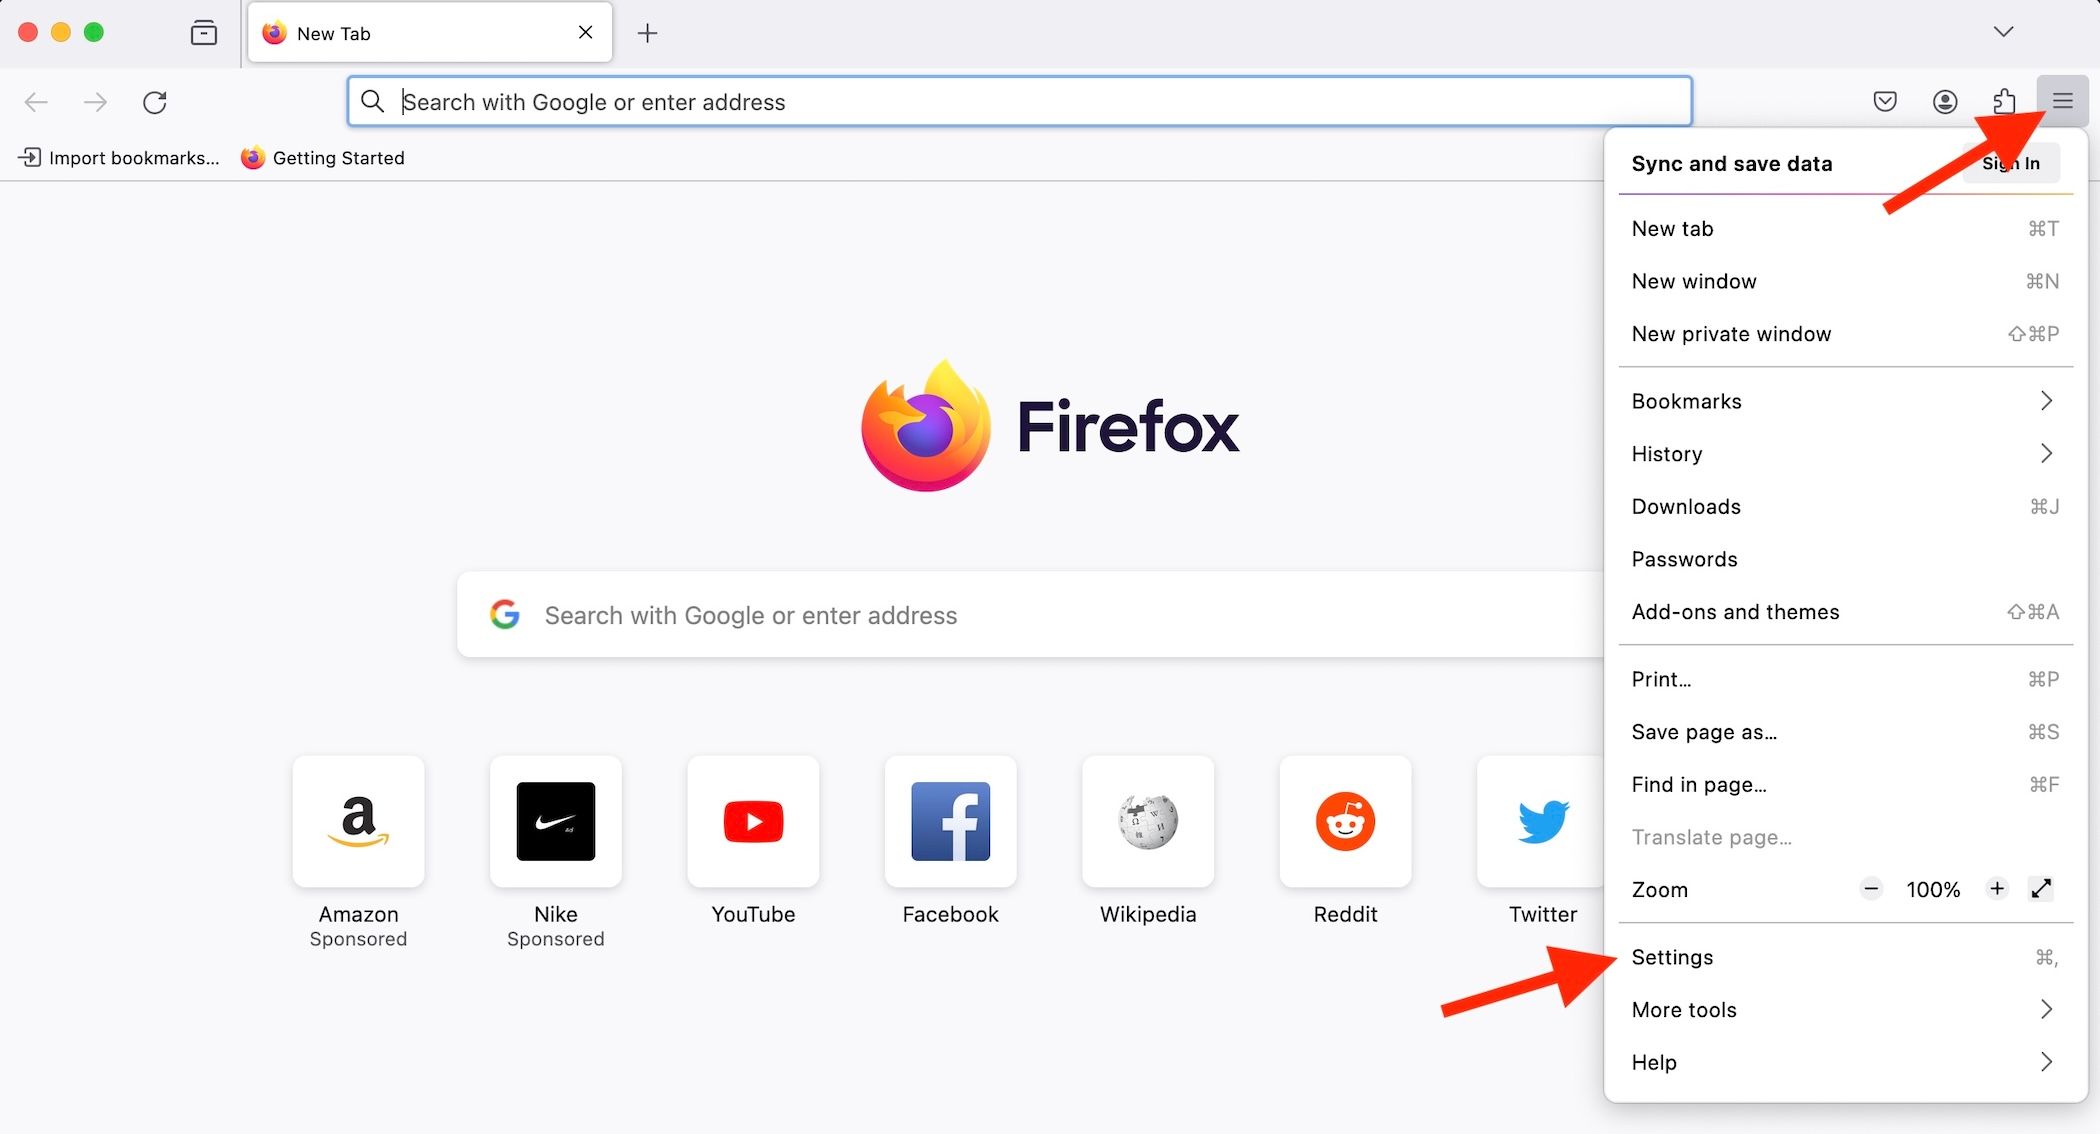 The location of the Firefox settings menu